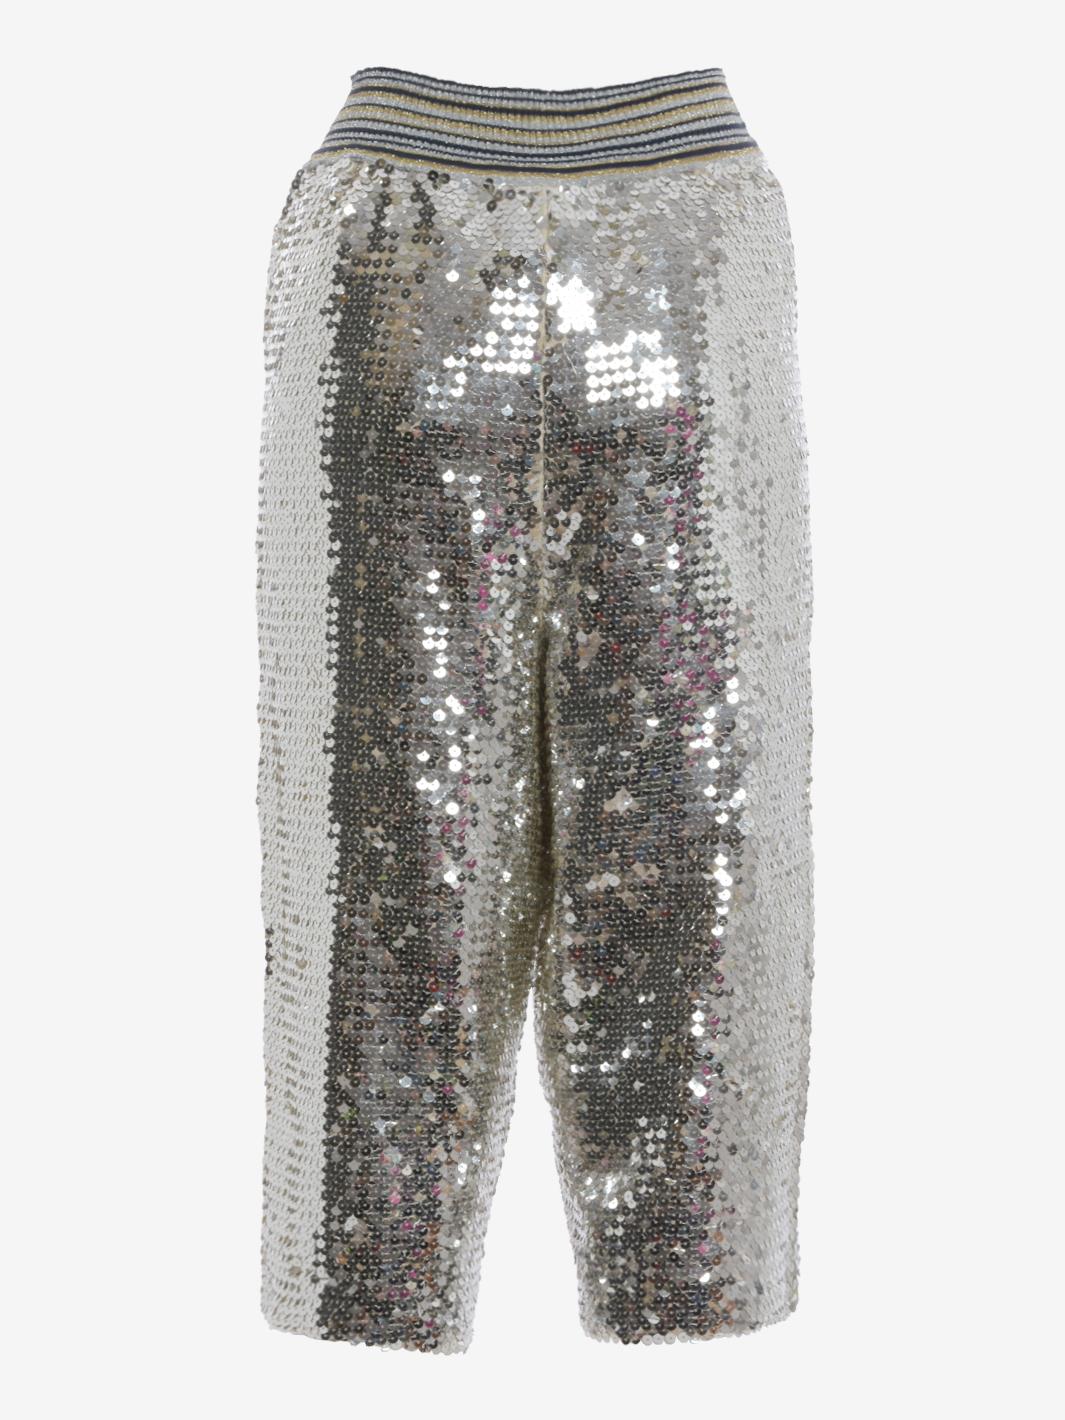 Gianfranco Ferré Sequined Capri Pants - 80s In Excellent Condition For Sale In Milano, IT